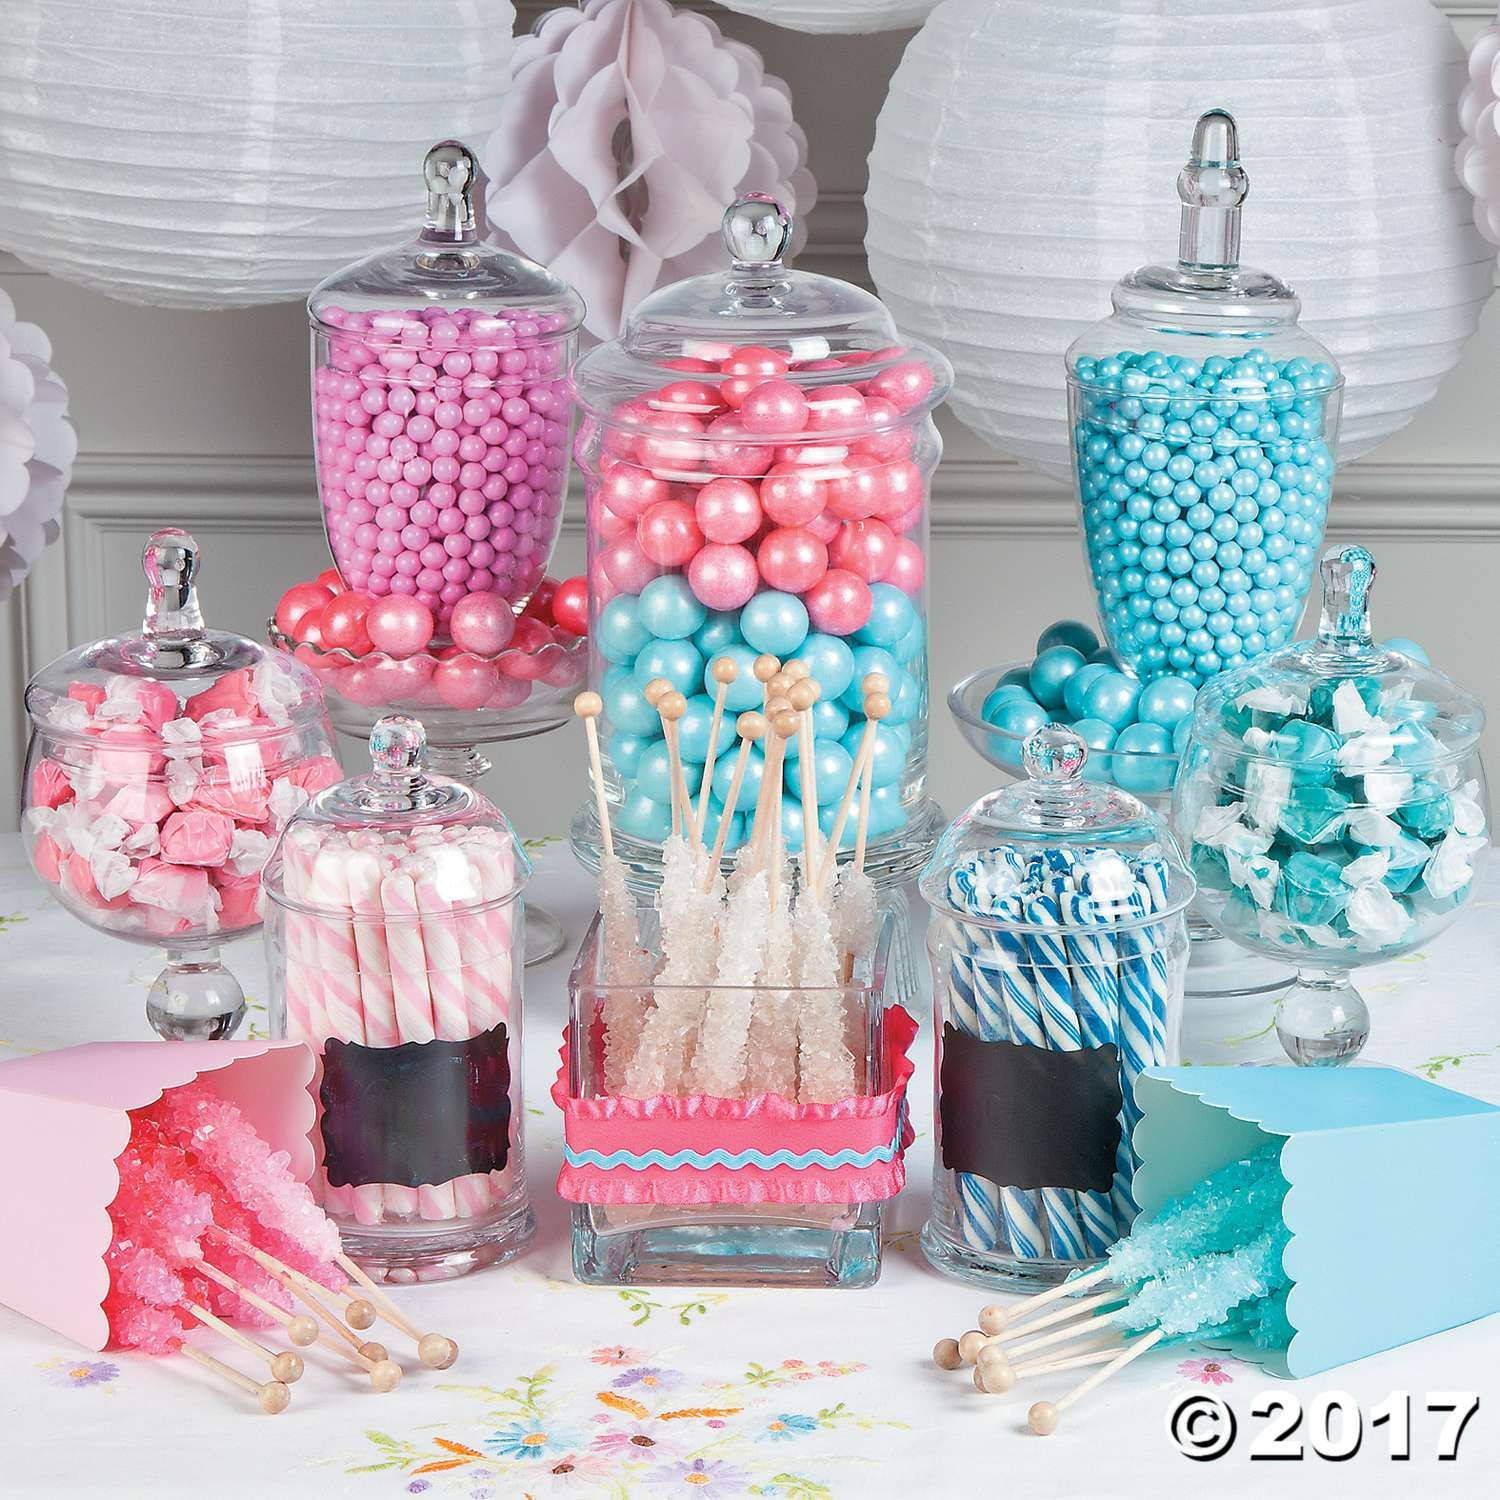 Baby Shower Gender Reveal Party Ideas
 Gender Reveal Party 42 mybabydoo